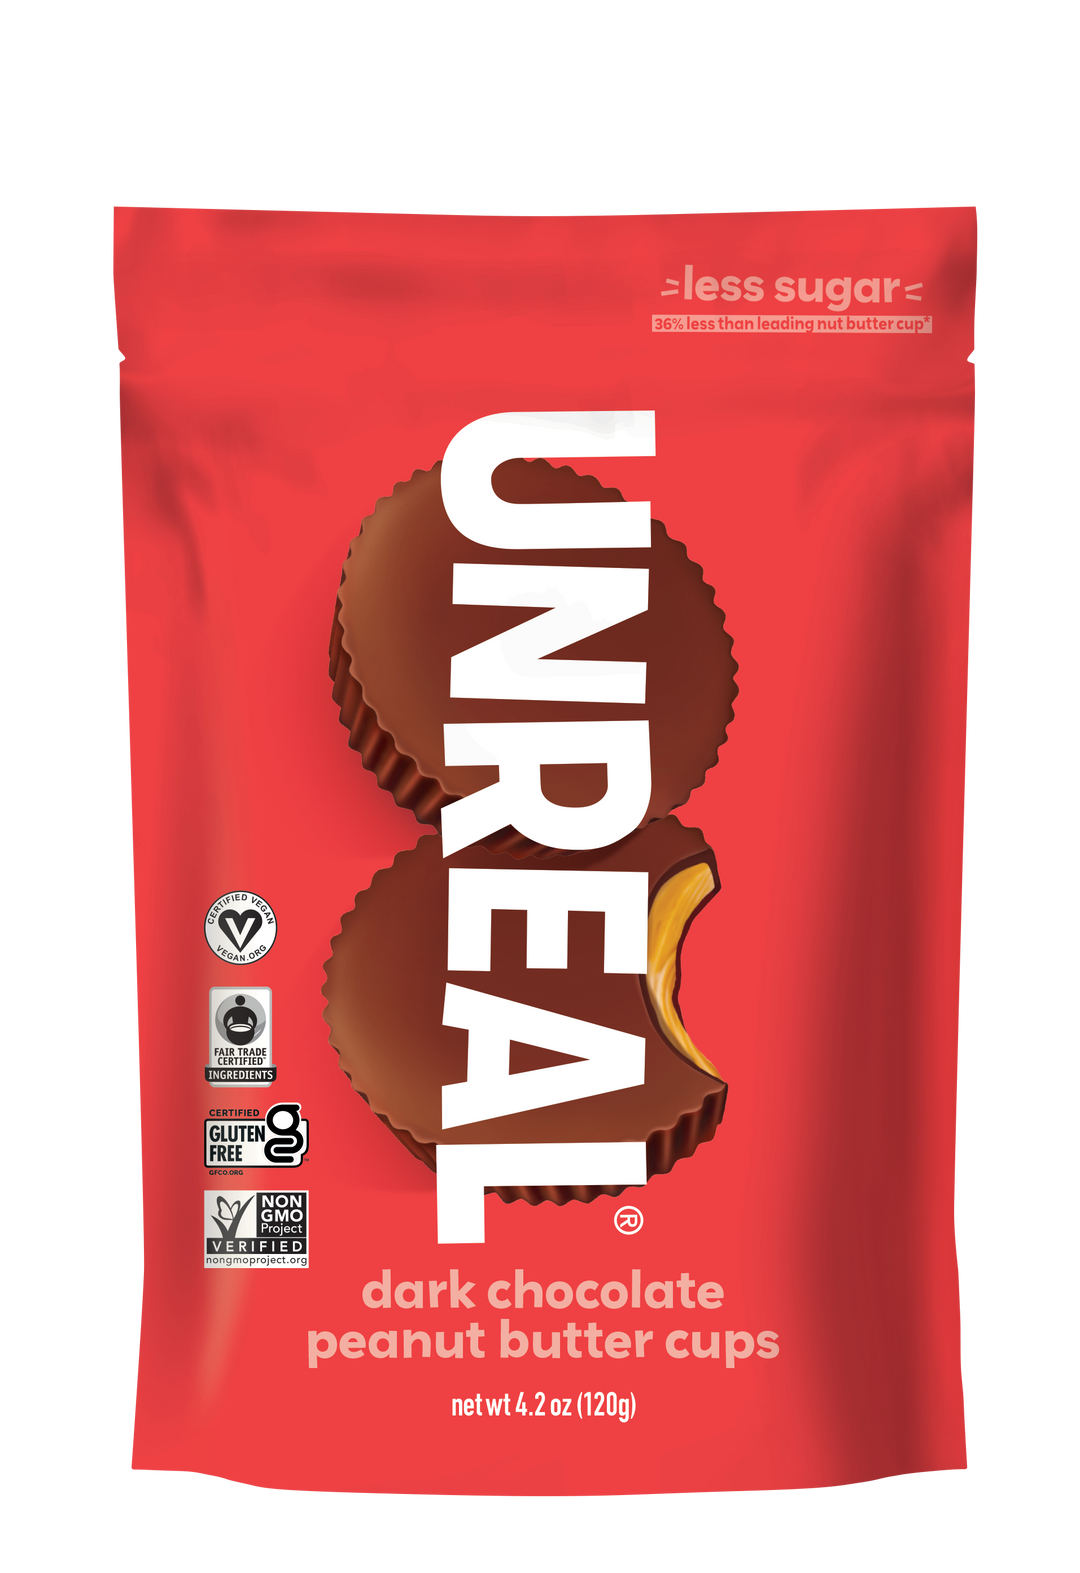 Unreal Candy Dark Chocolate Peanut Butter Cup Bags-4.2 oz.-6/Case